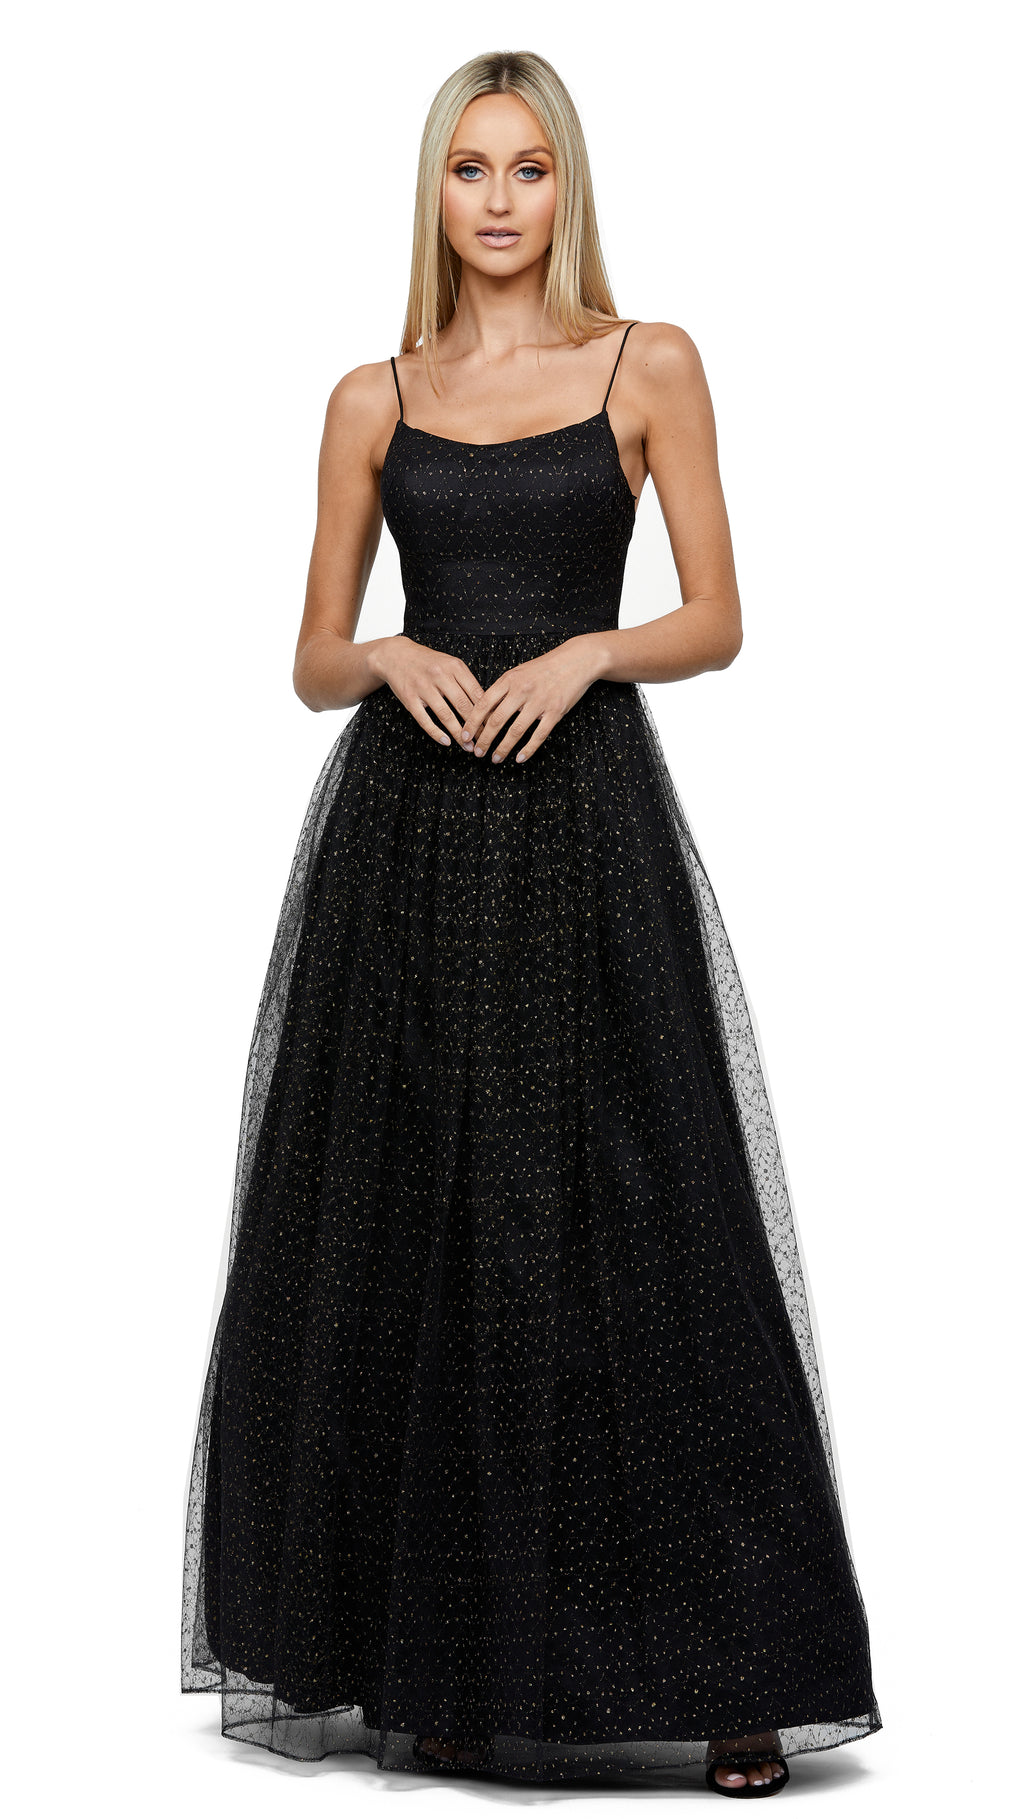 Sorrento Scoop Neck Ball Gown in Black/Gold